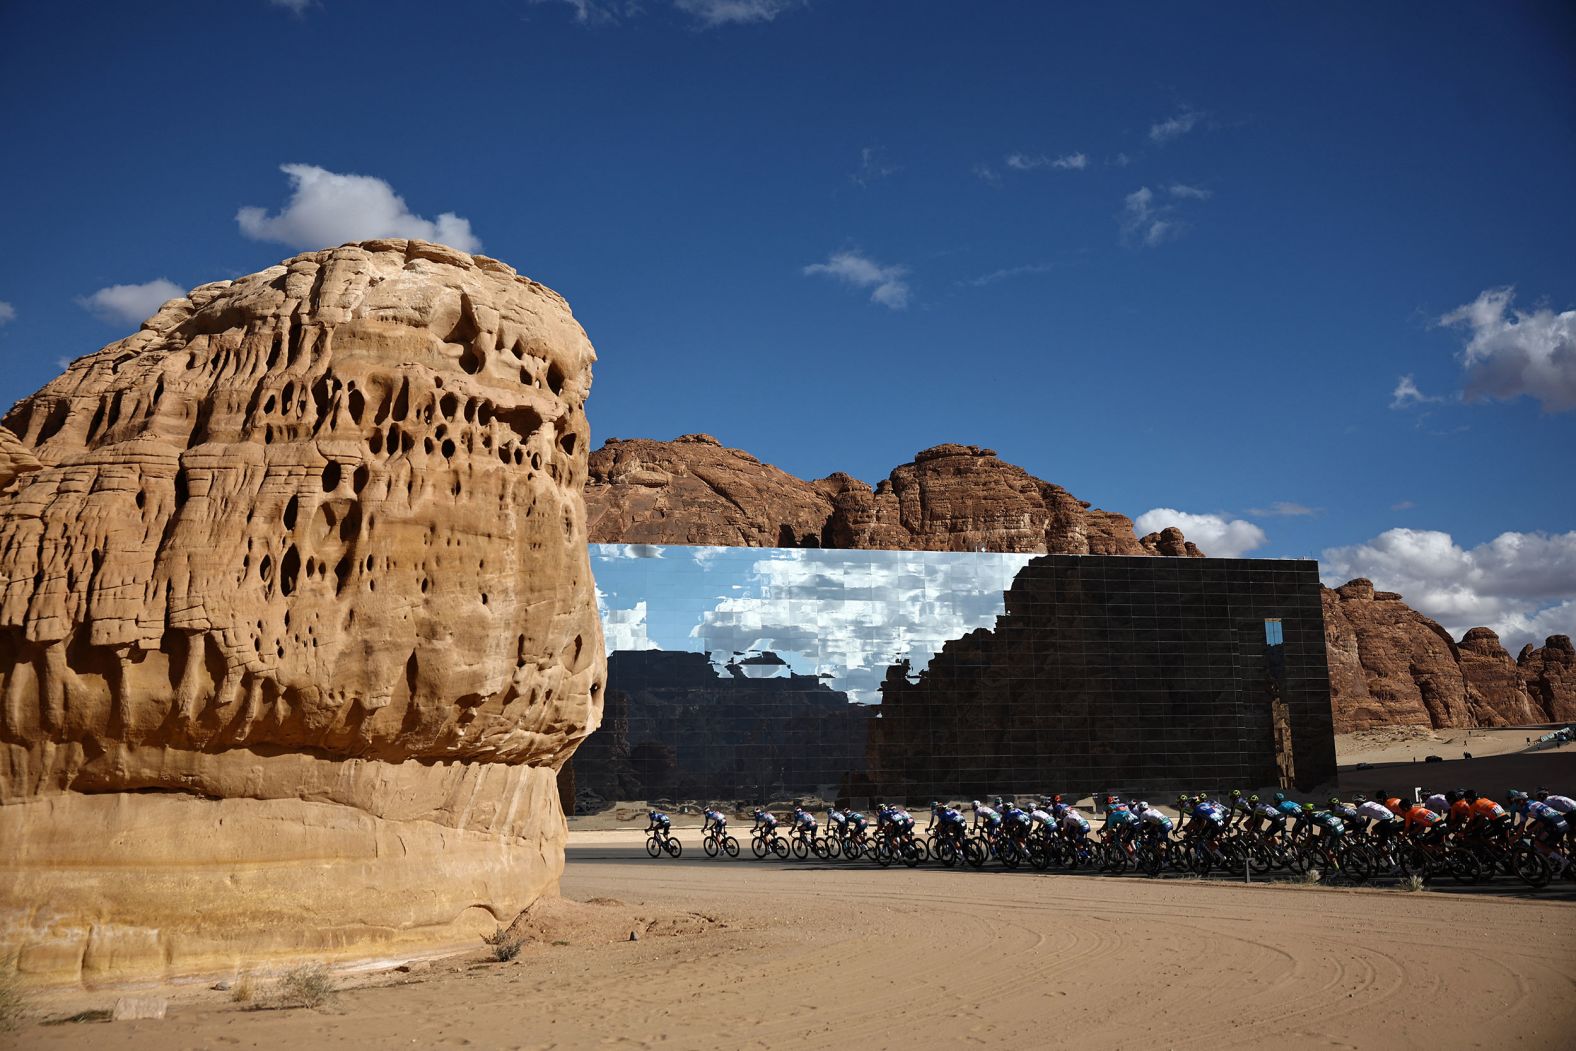 A pack of cyclists rides in front of the Maraya, the world’s largest mirrored building, during the fourth stage of the AlUla Tour in Saudi Arabia on Friday, February 2.